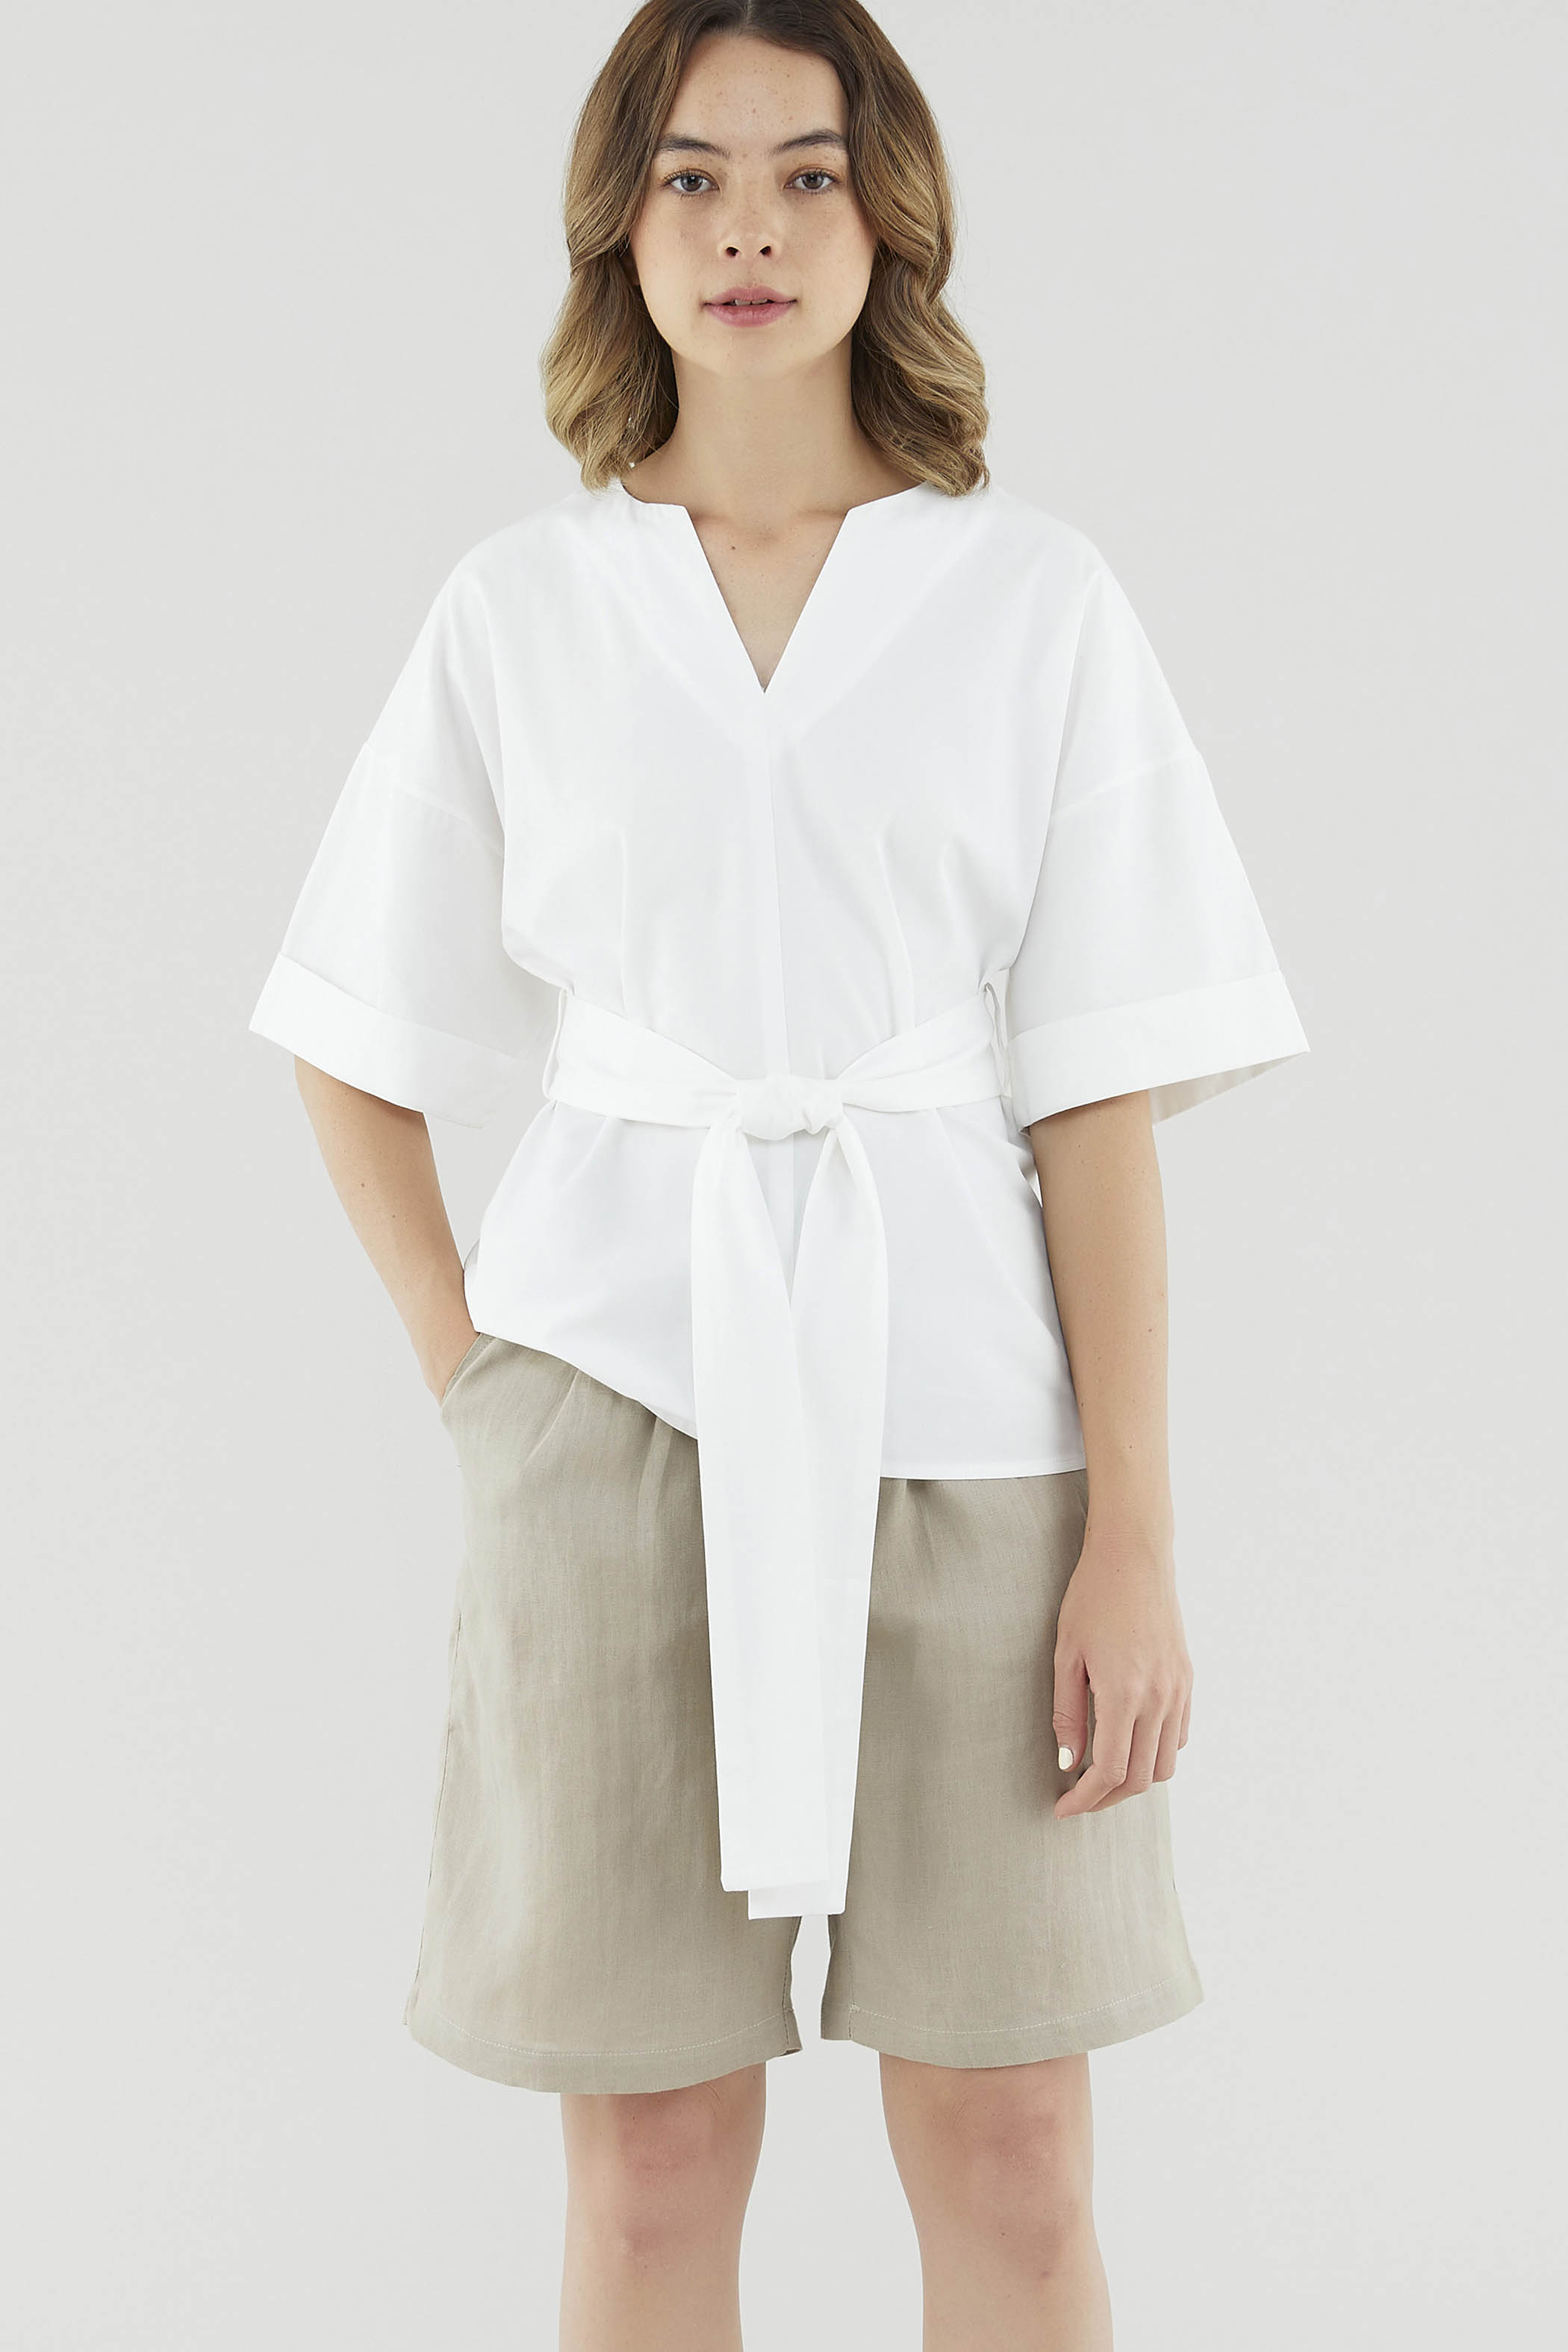 Jacalin Belted Blouse